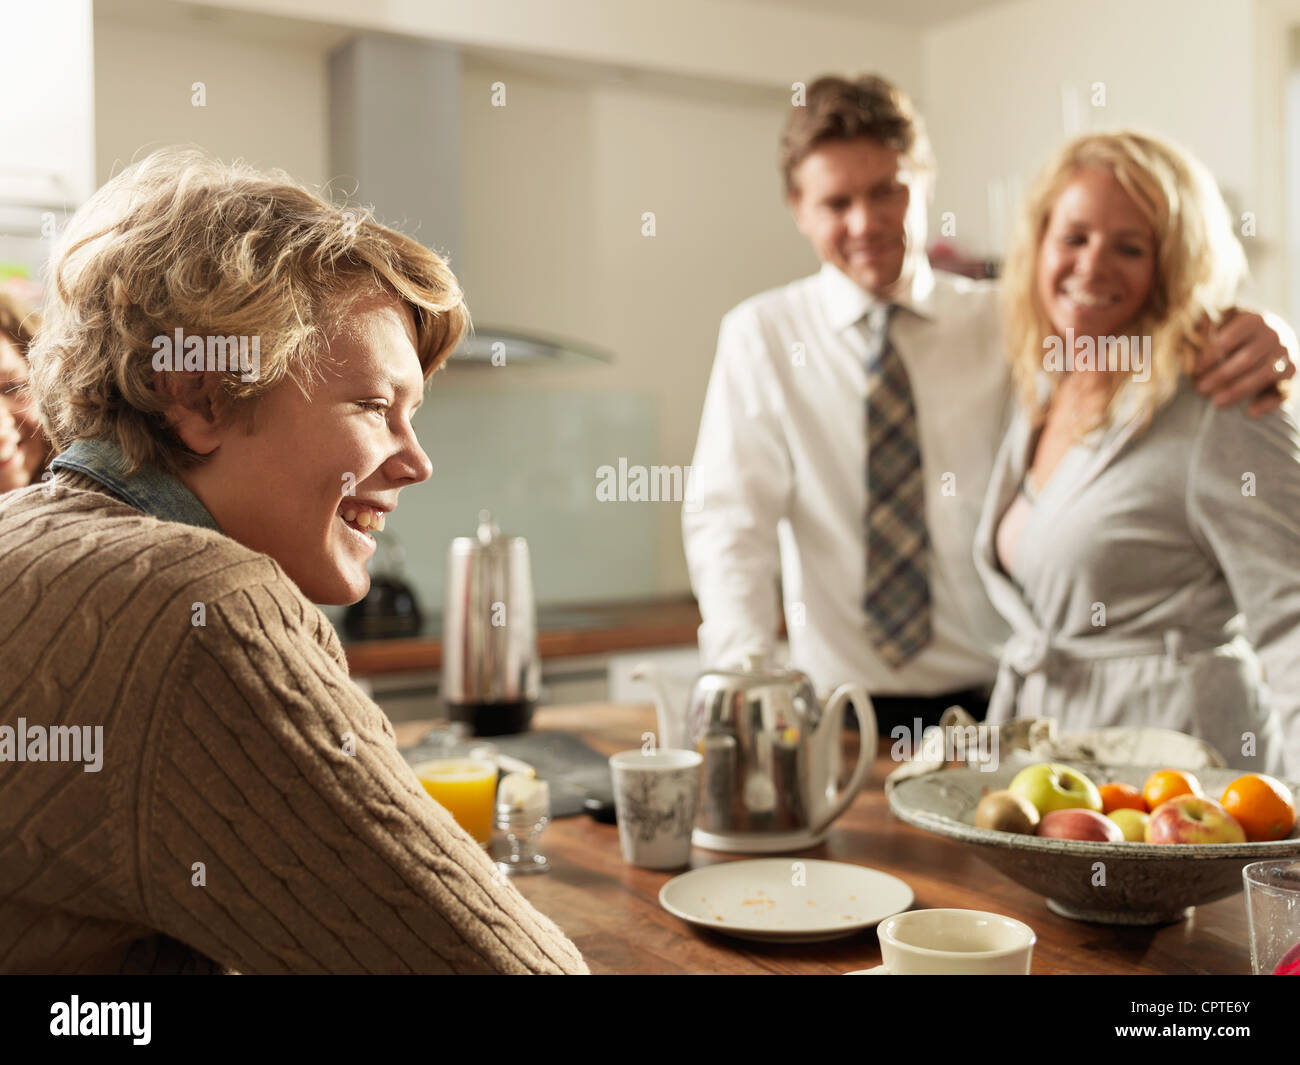 Teenage son sitting at kitchen table with parents in background Stock Photo